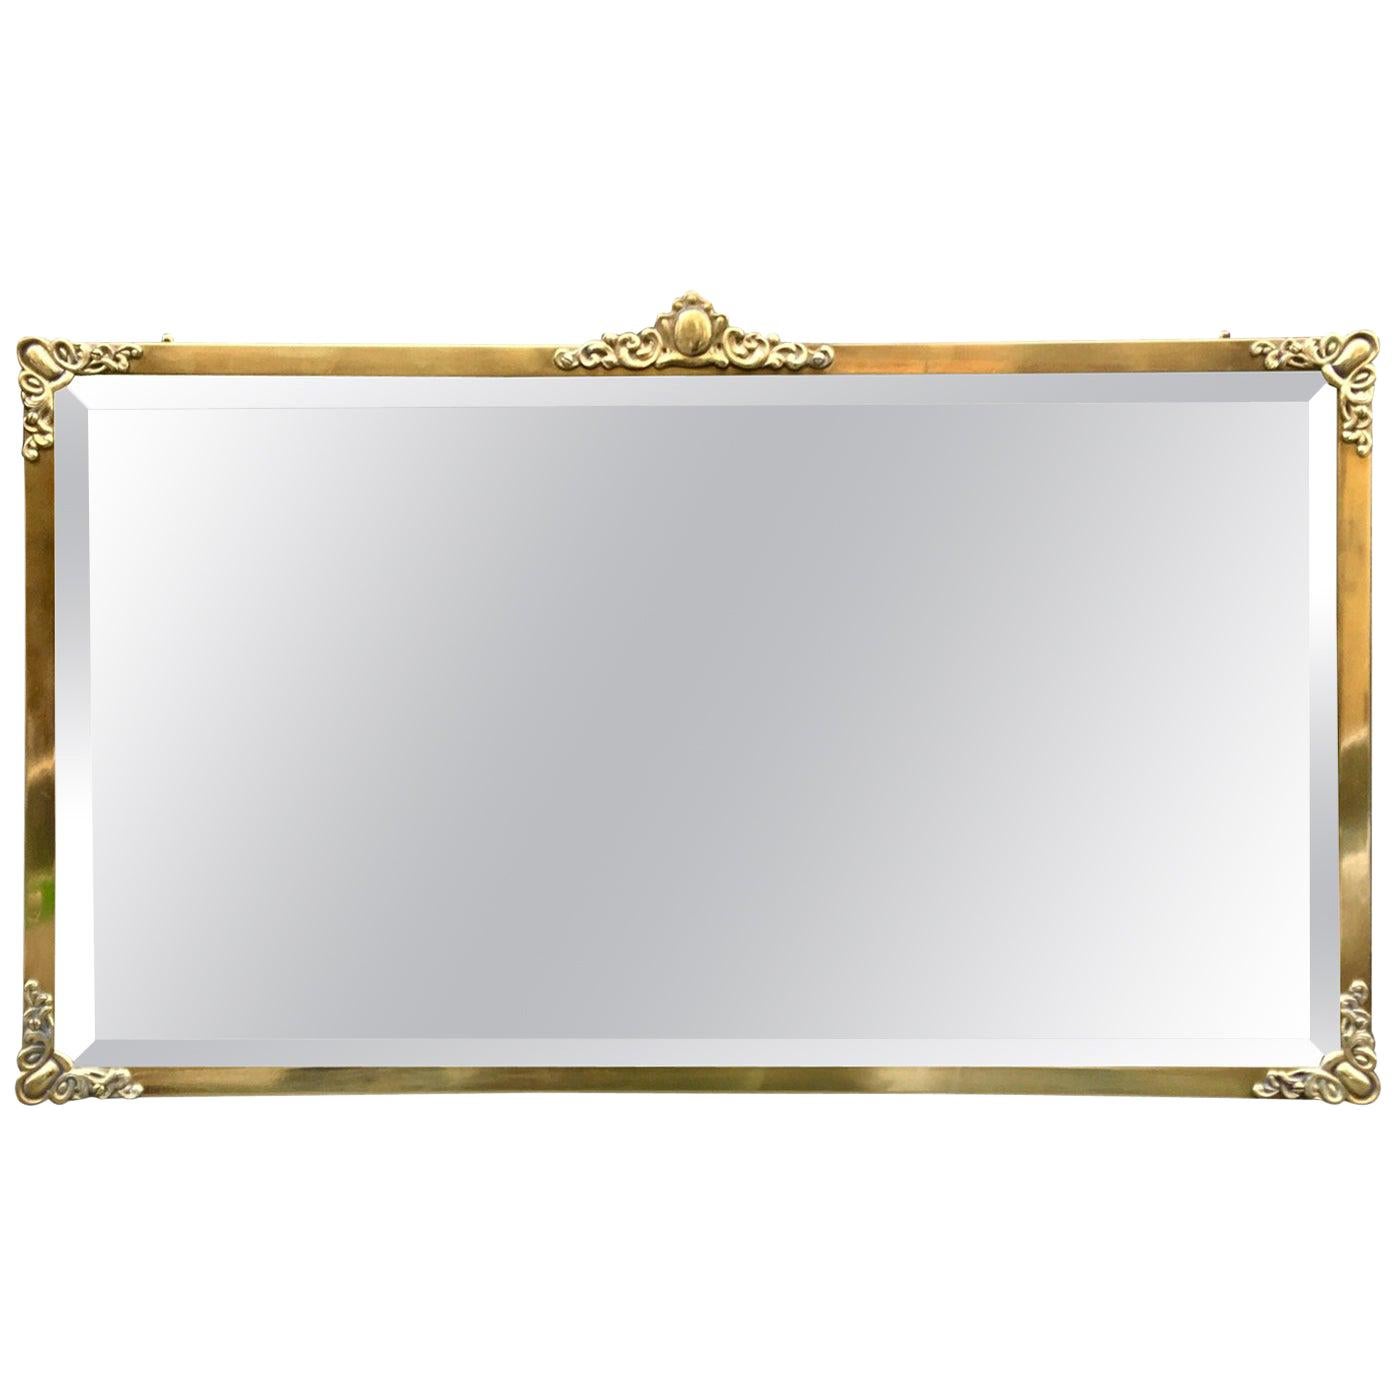 Rectangular Art Nouveau Mirror with Brass Frame and Friezes, Early 1900 For Sale